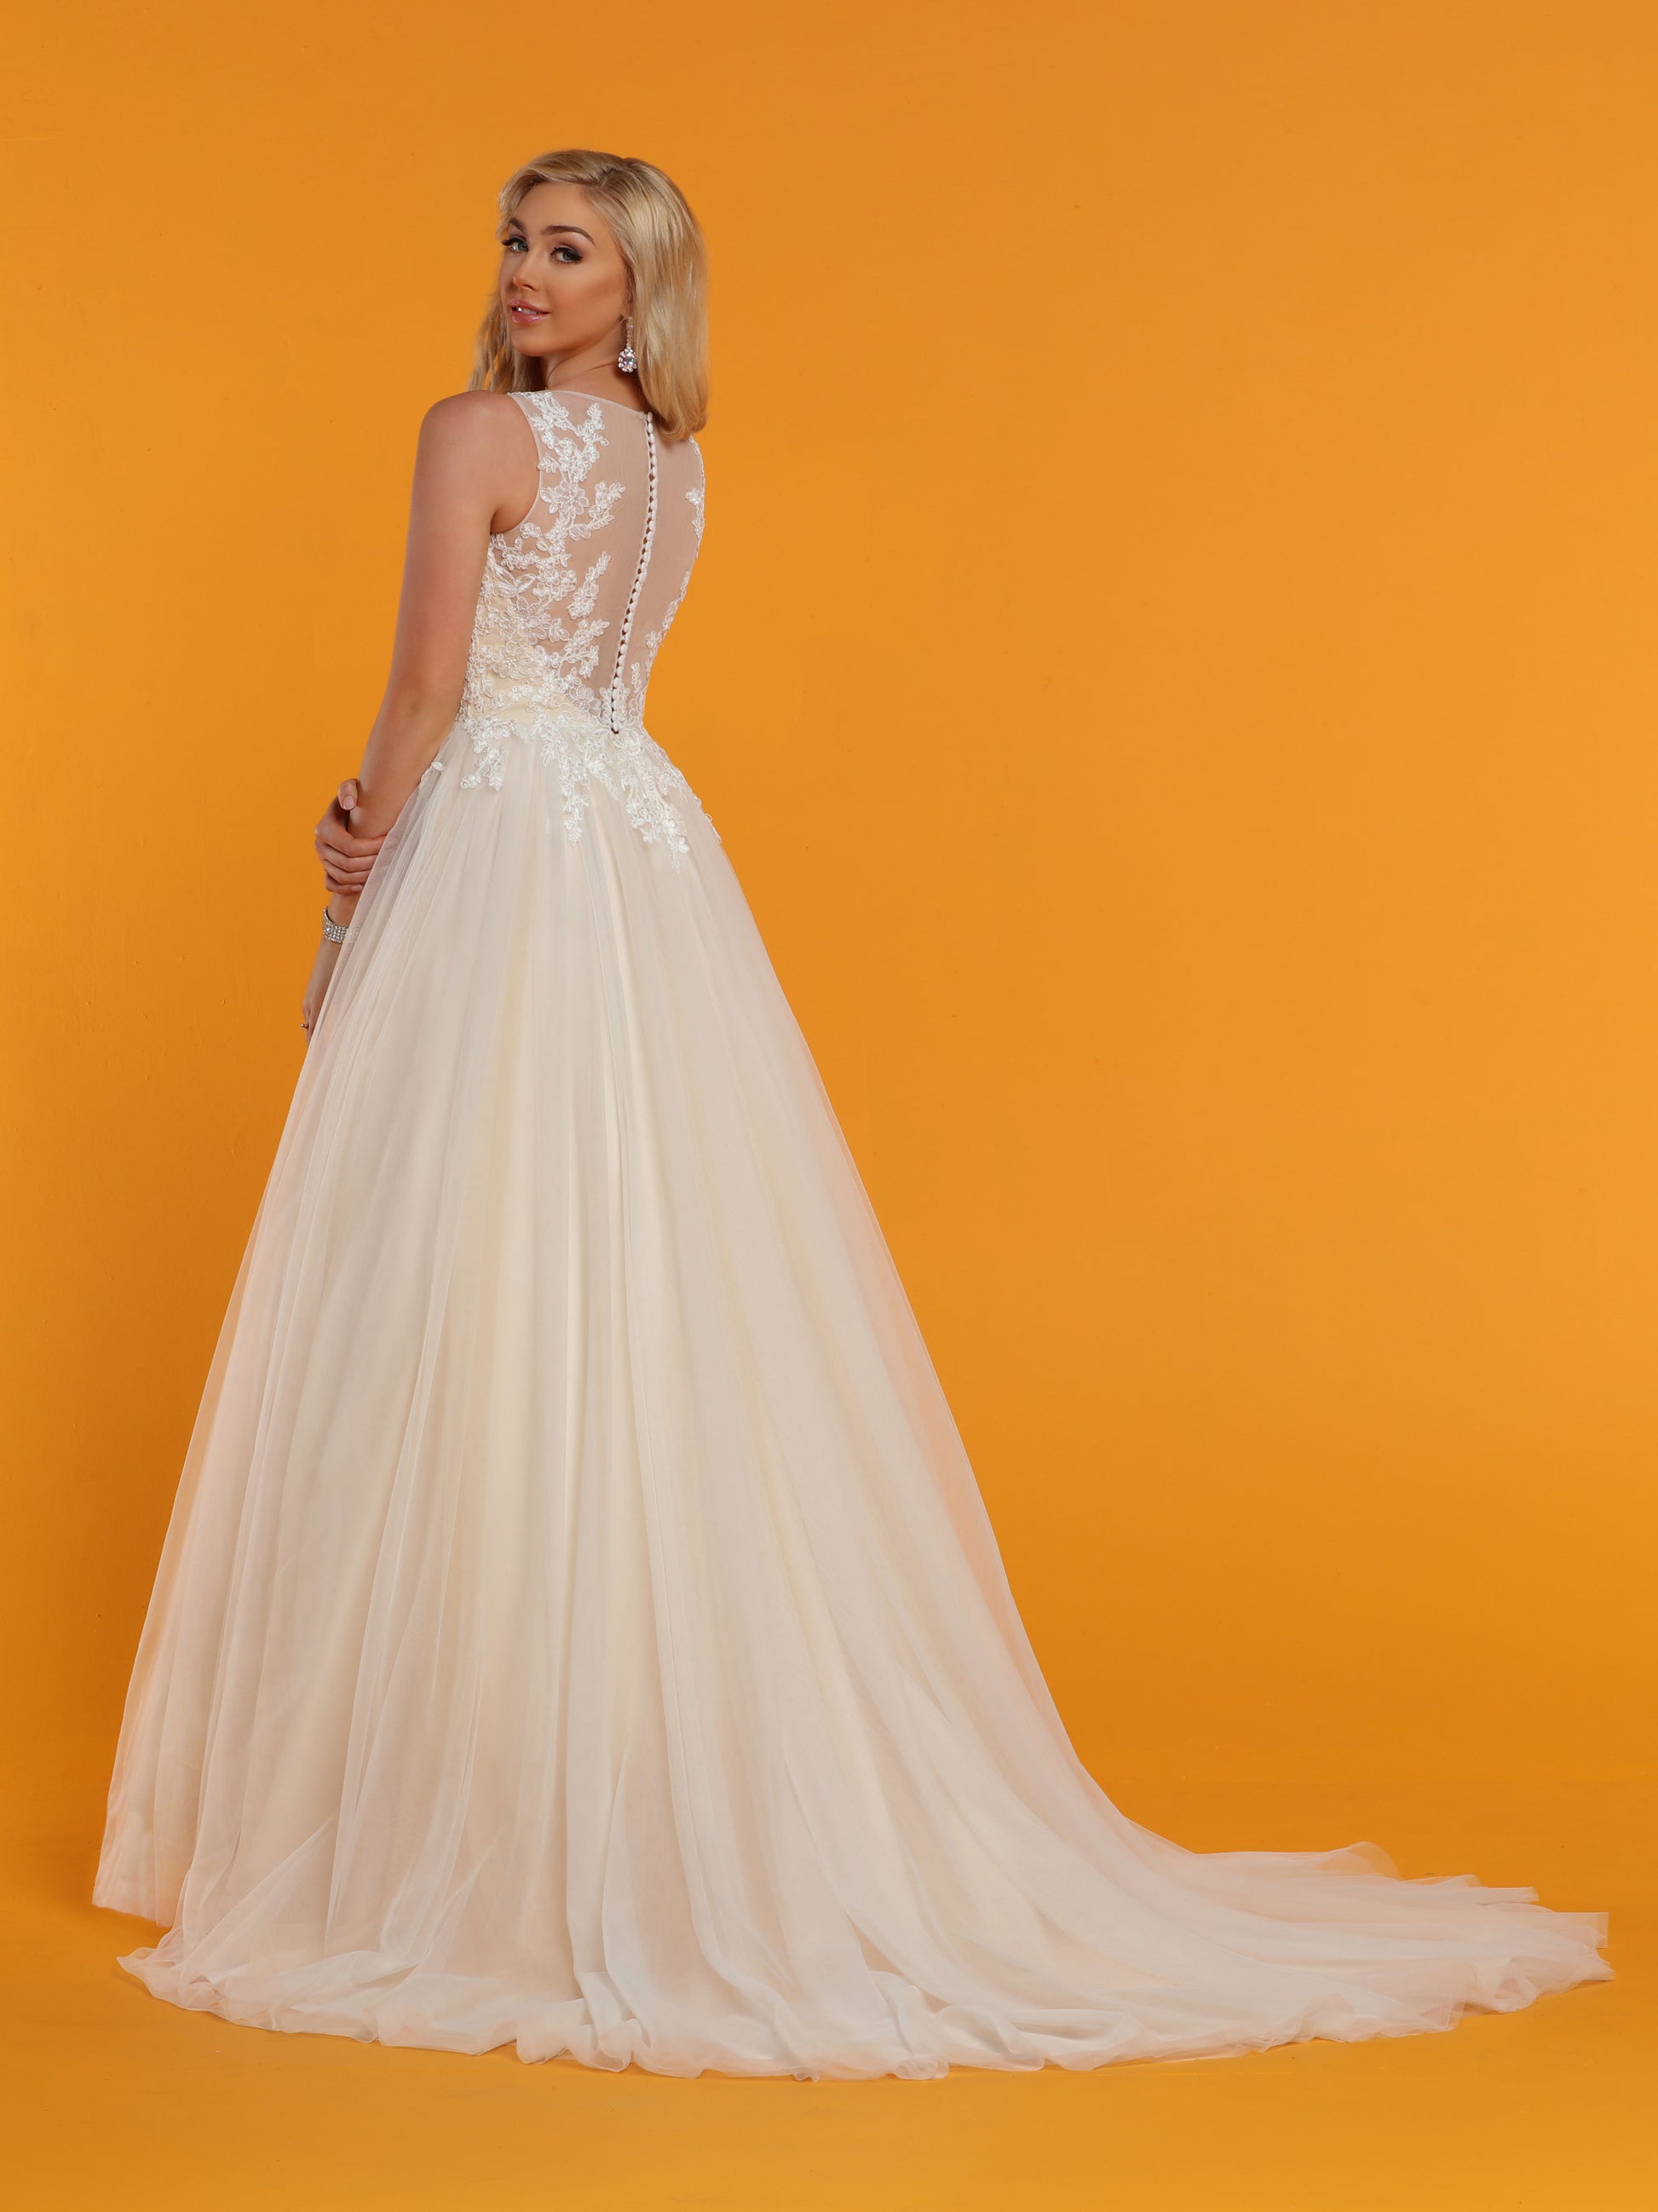 Davinci Bridal 50515 is a Tulle ballgown Wedding Dress. Featuring a sheer illusion lace high neckline and back. Buttons along the back seam. Lace cascades from bodice down into the lush tulle Ballgown skirt.  Available for 1-2 Week Delivery!!!  Available Sizes: 2,4,6,8,10,12,14,16,18,20  Available Colors: Ivory/Nude, Ivory/Ivory